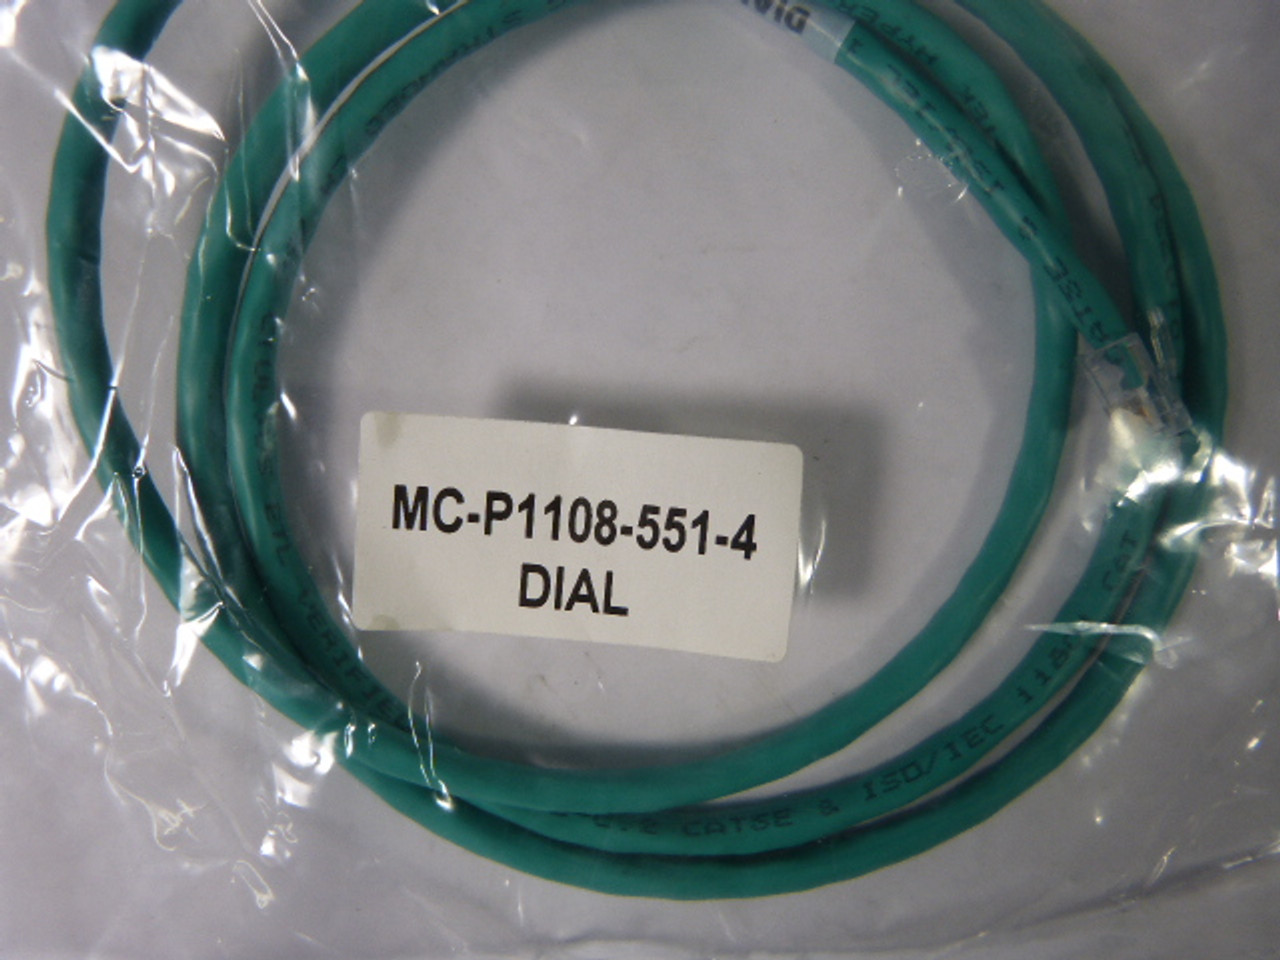 Anixter MCP-P1108-551-4-DIAL CAT5 Cable ! NWB !